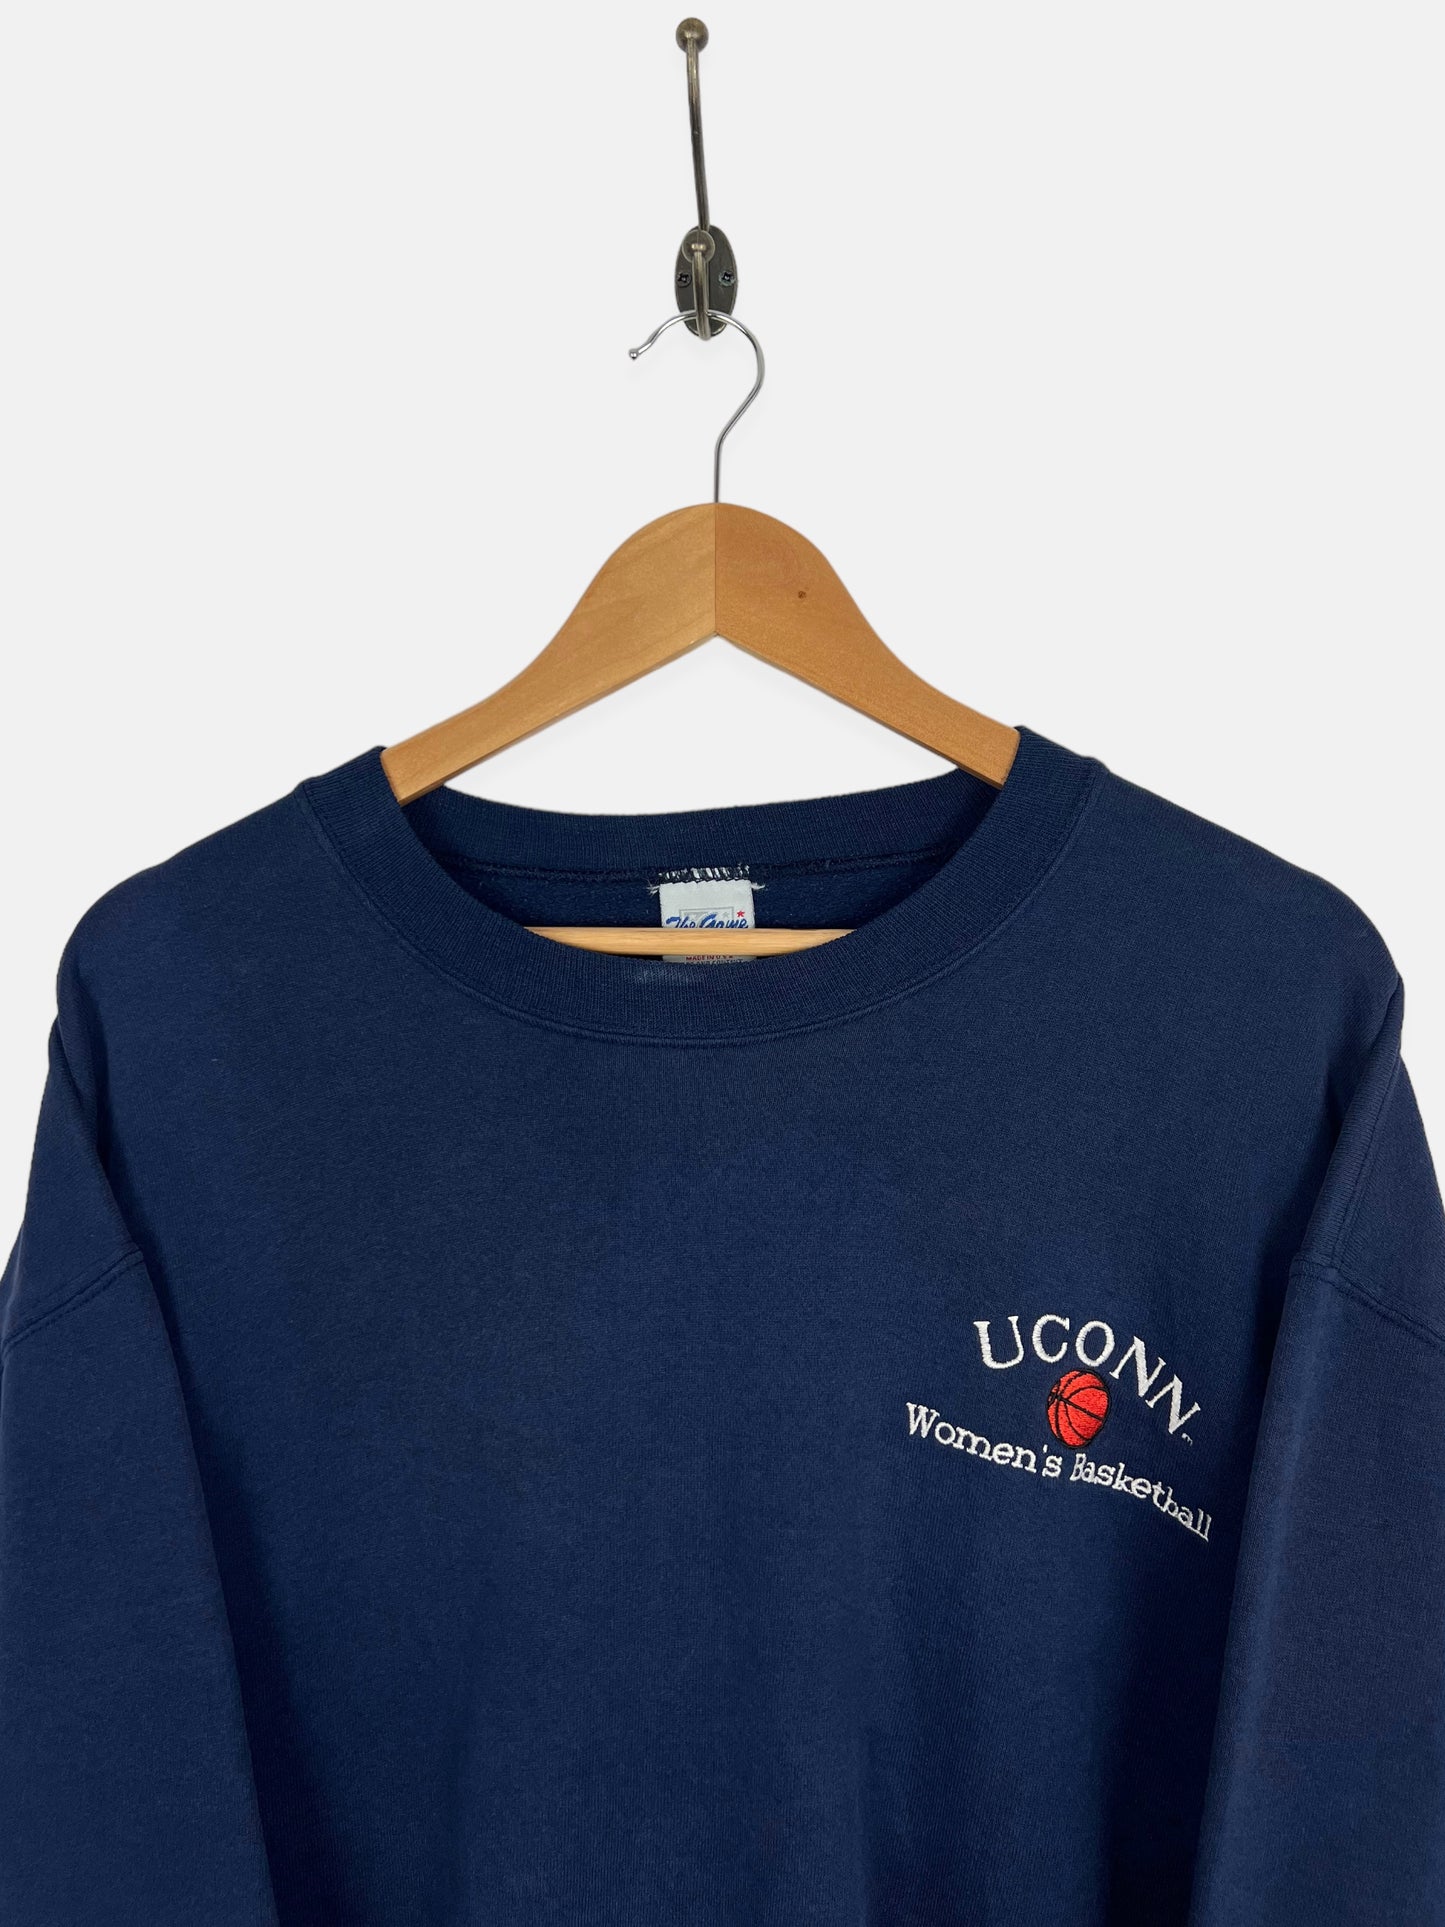 90's UConn Womens Basketball USA Made Embroidered Vintage Sweatshirt Size L